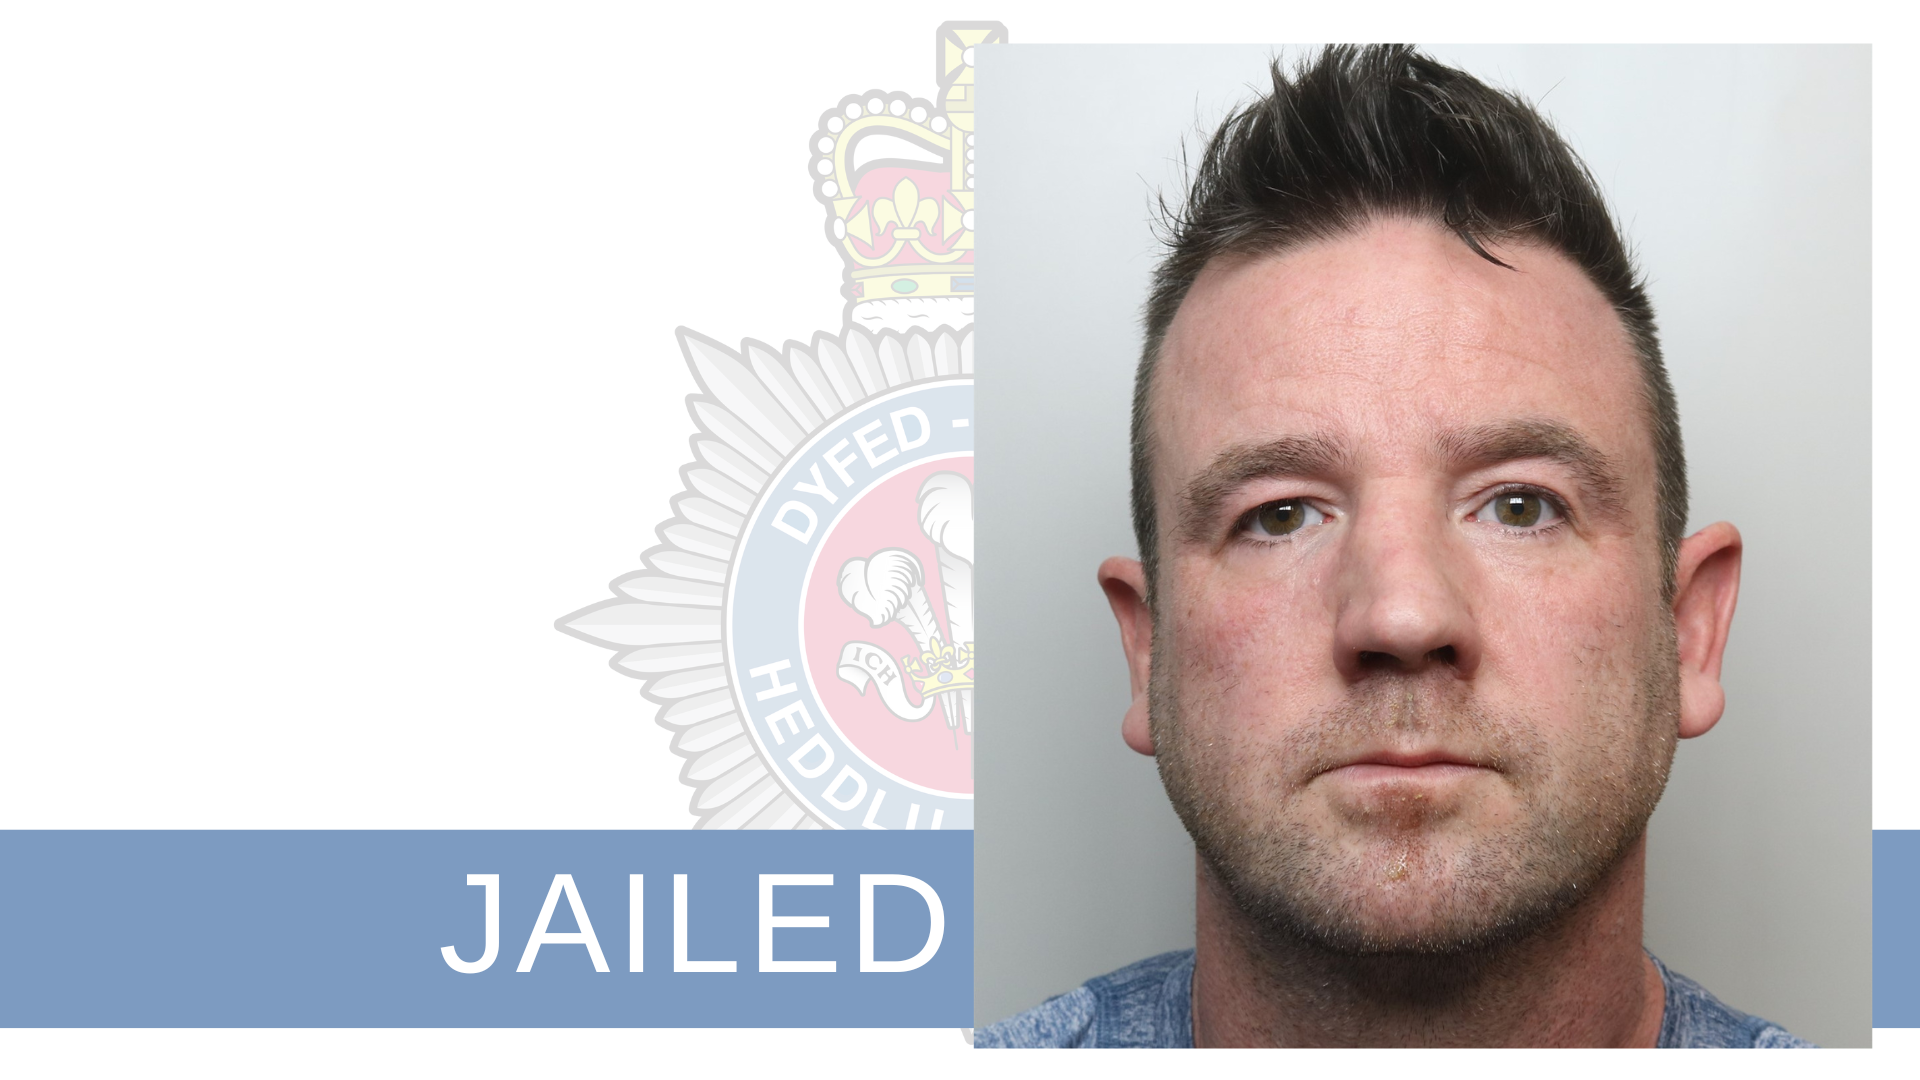 Man jailed after victim called police during assault